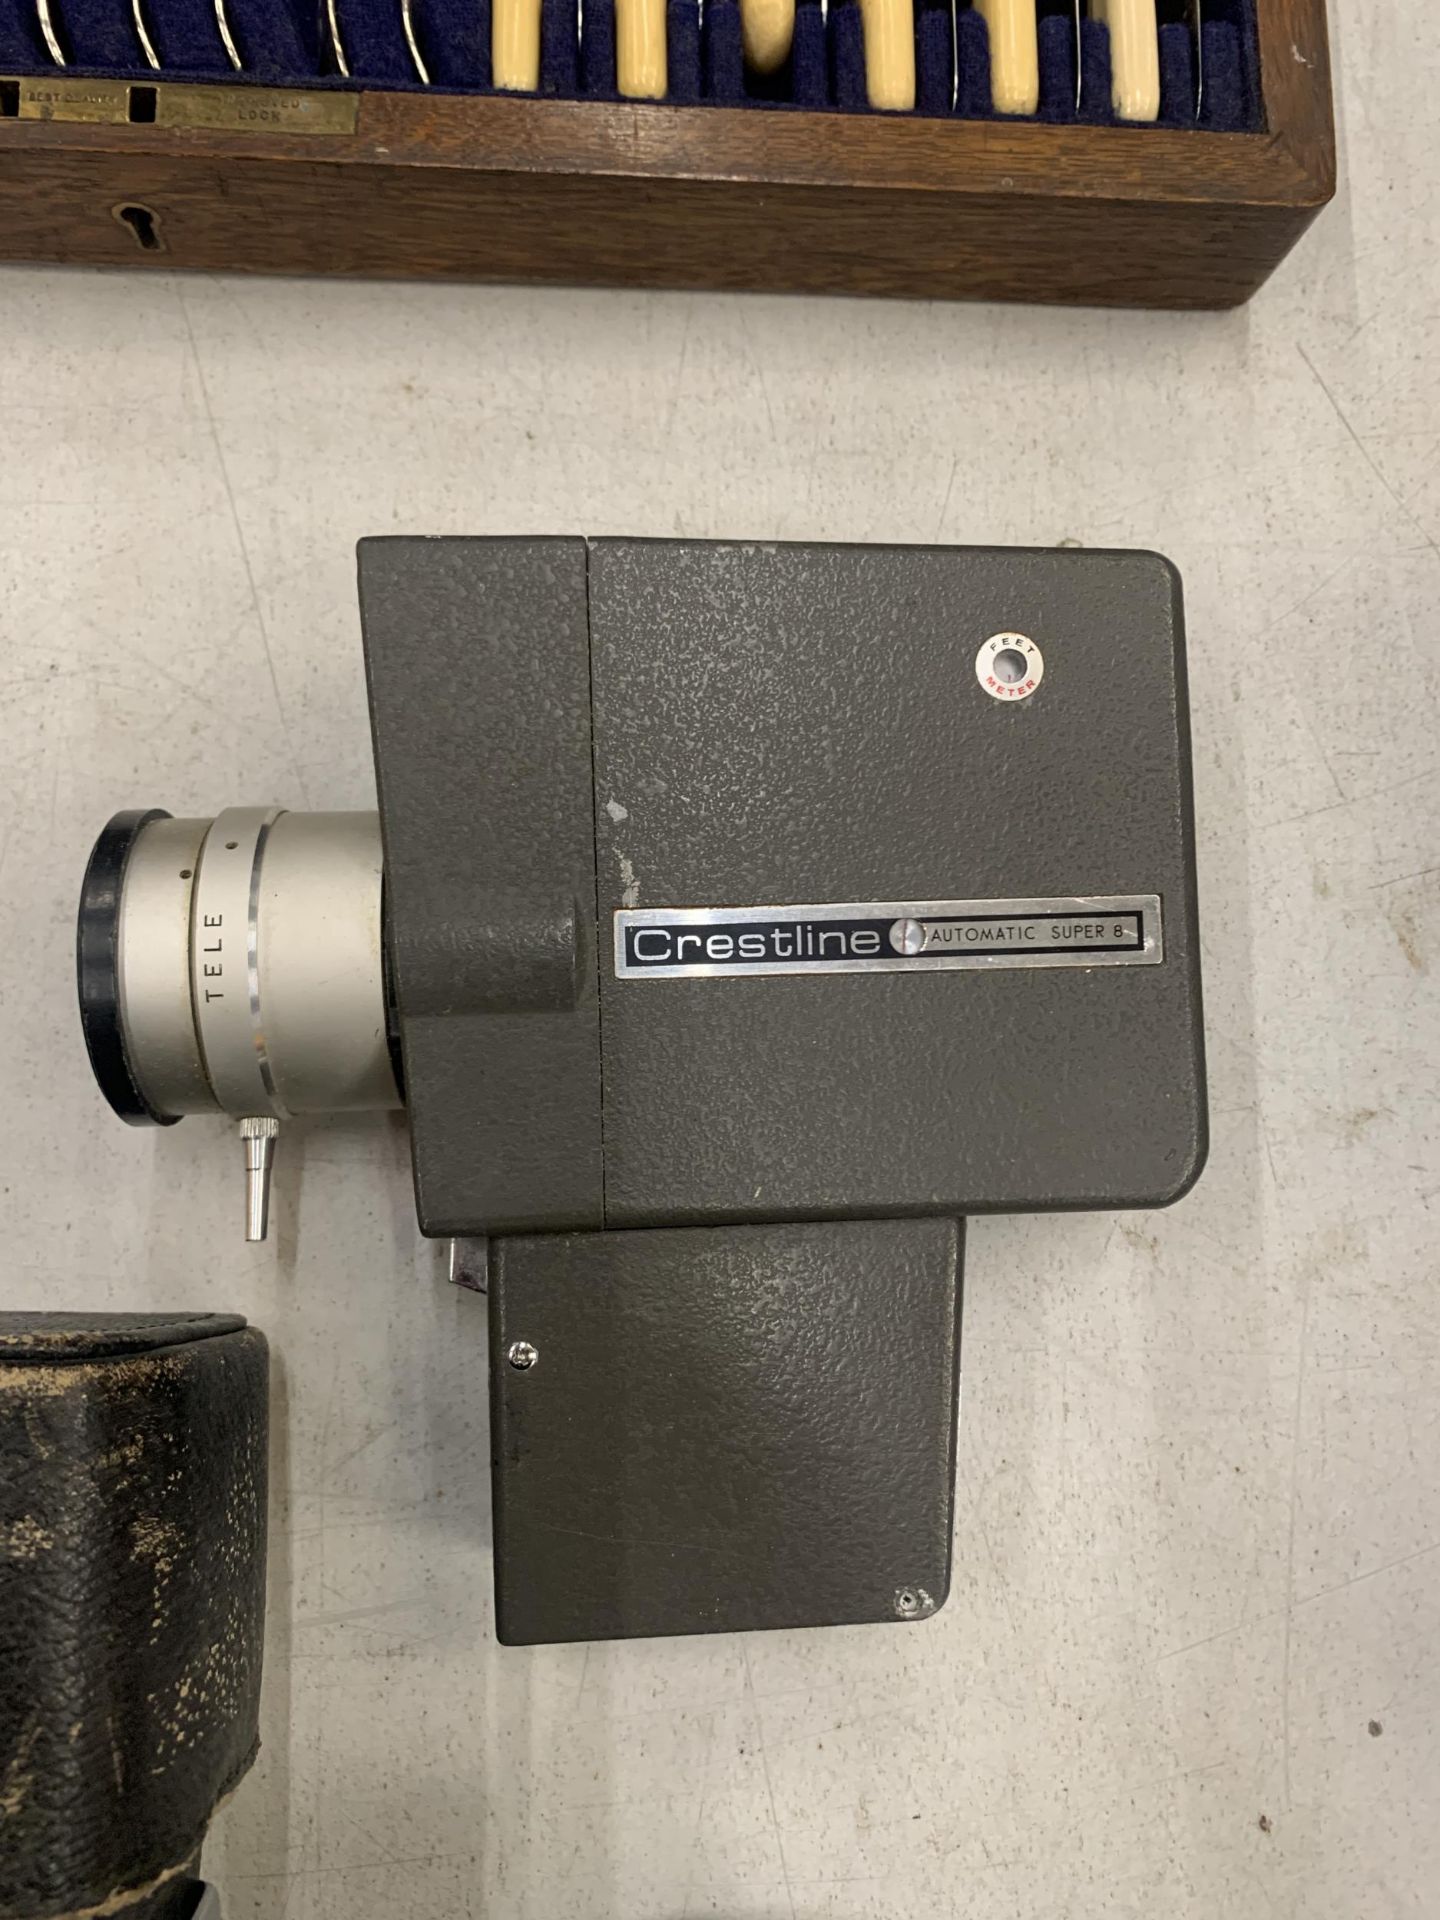 TWO VINTAGE 1960S SUPER 8 CINE CAMERAS - CANON AND CRESTINE - Image 2 of 3